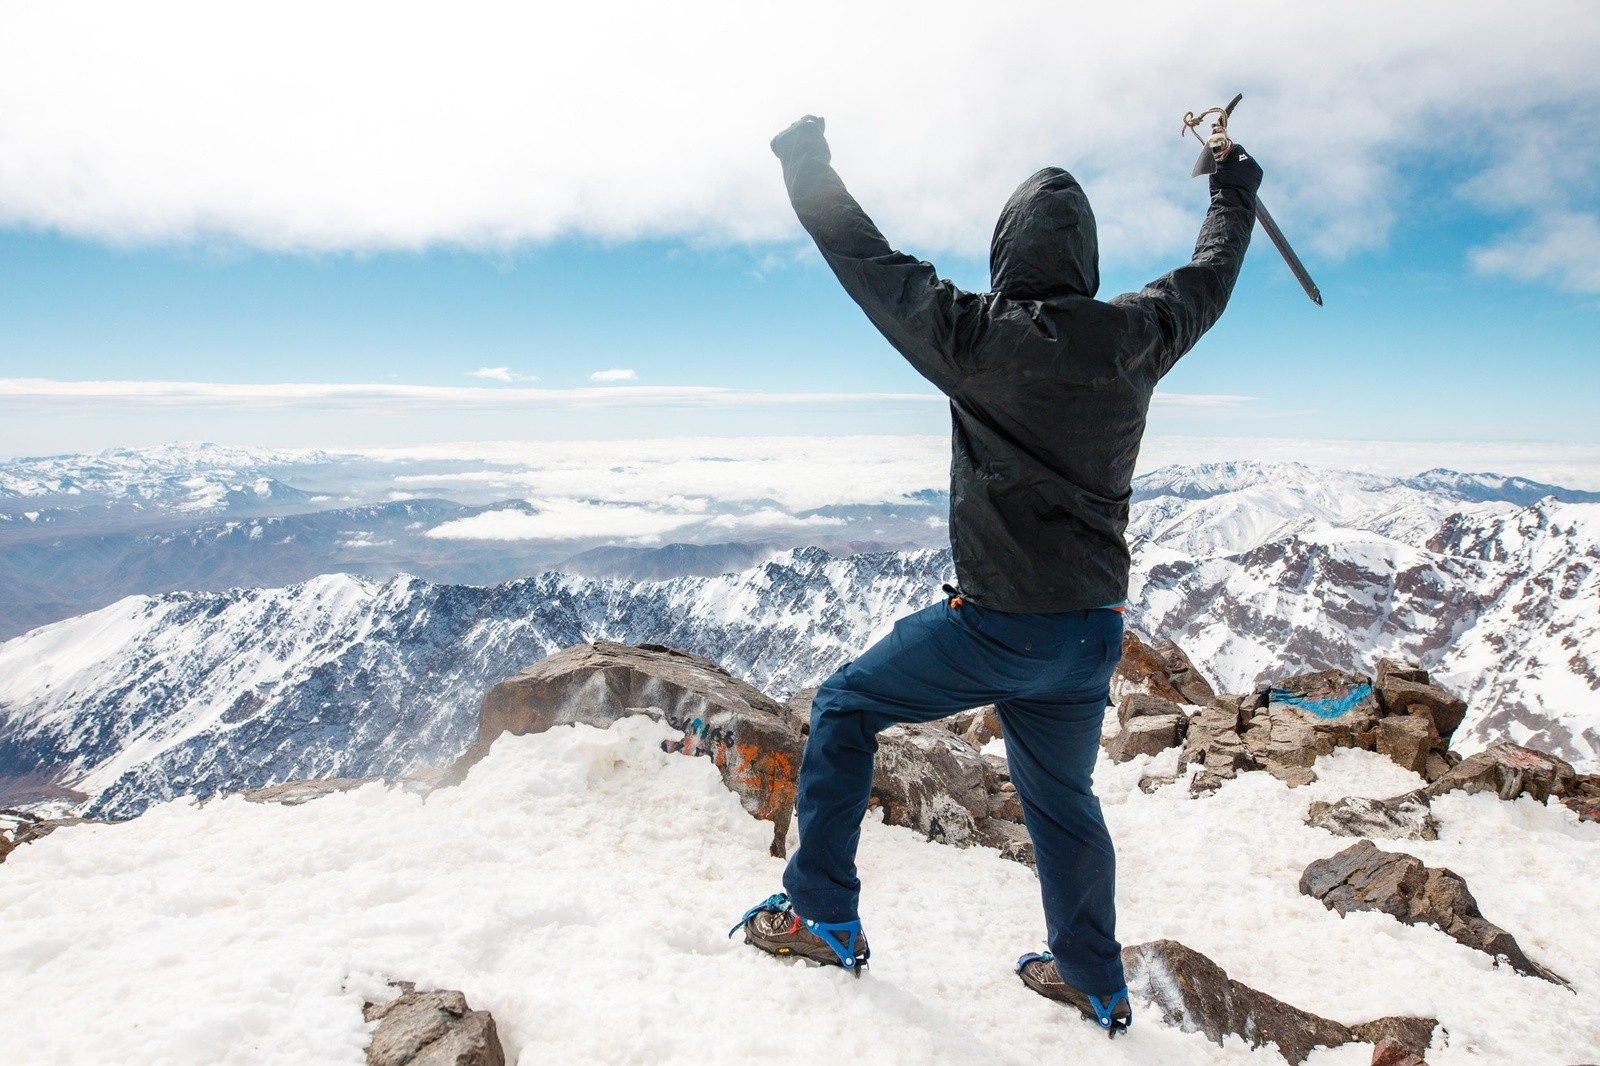 Back view of a hiker, wearing crampons, celebrating at the top of a snowy summit